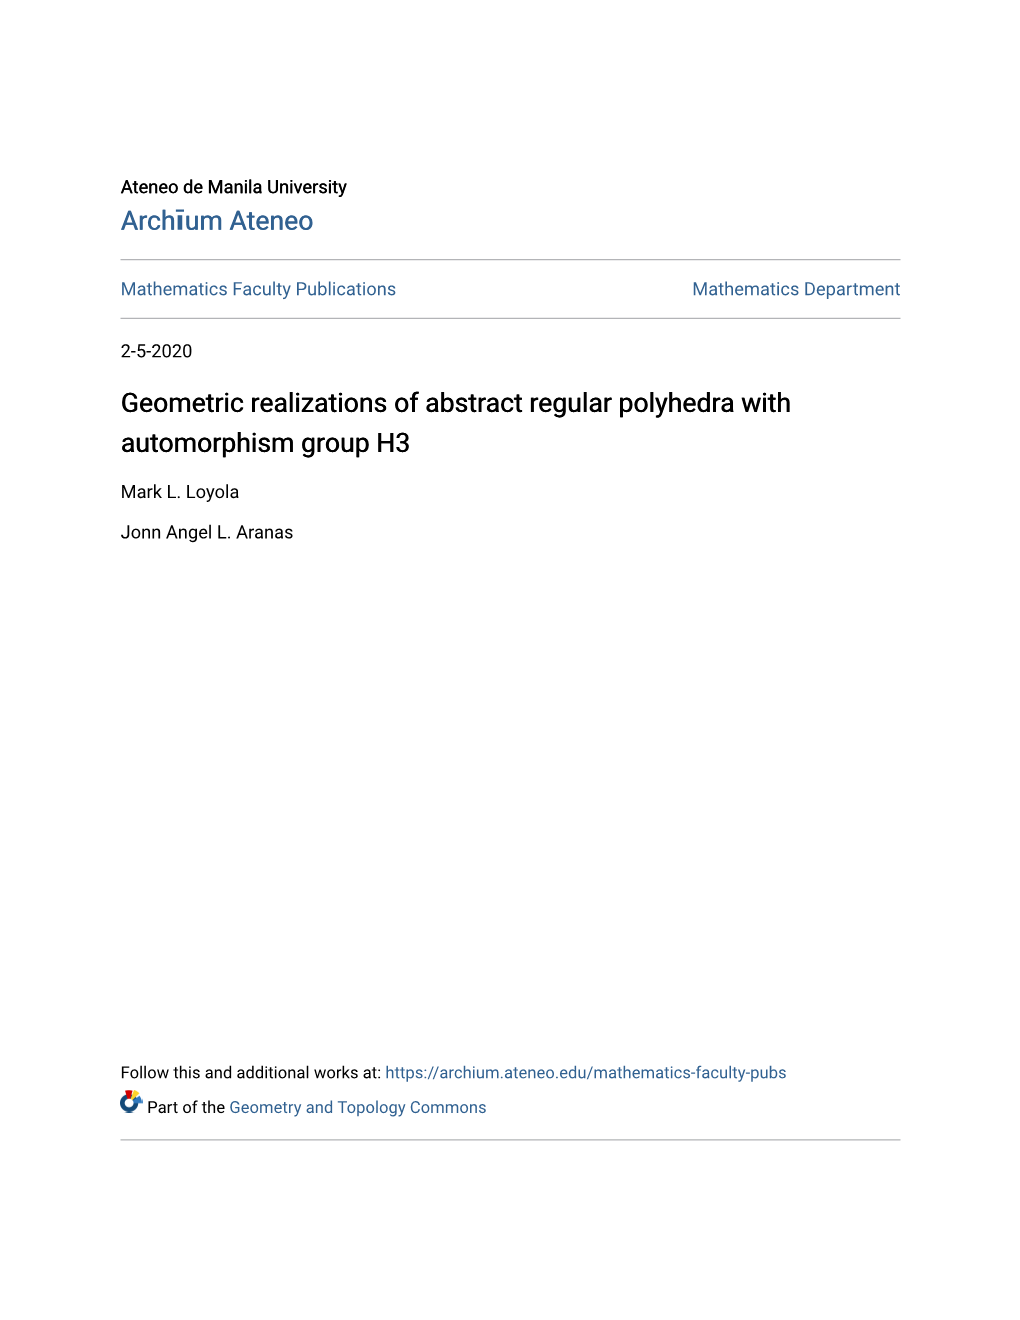 Geometric Realizations of Abstract Regular Polyhedra with Automorphism Group H3